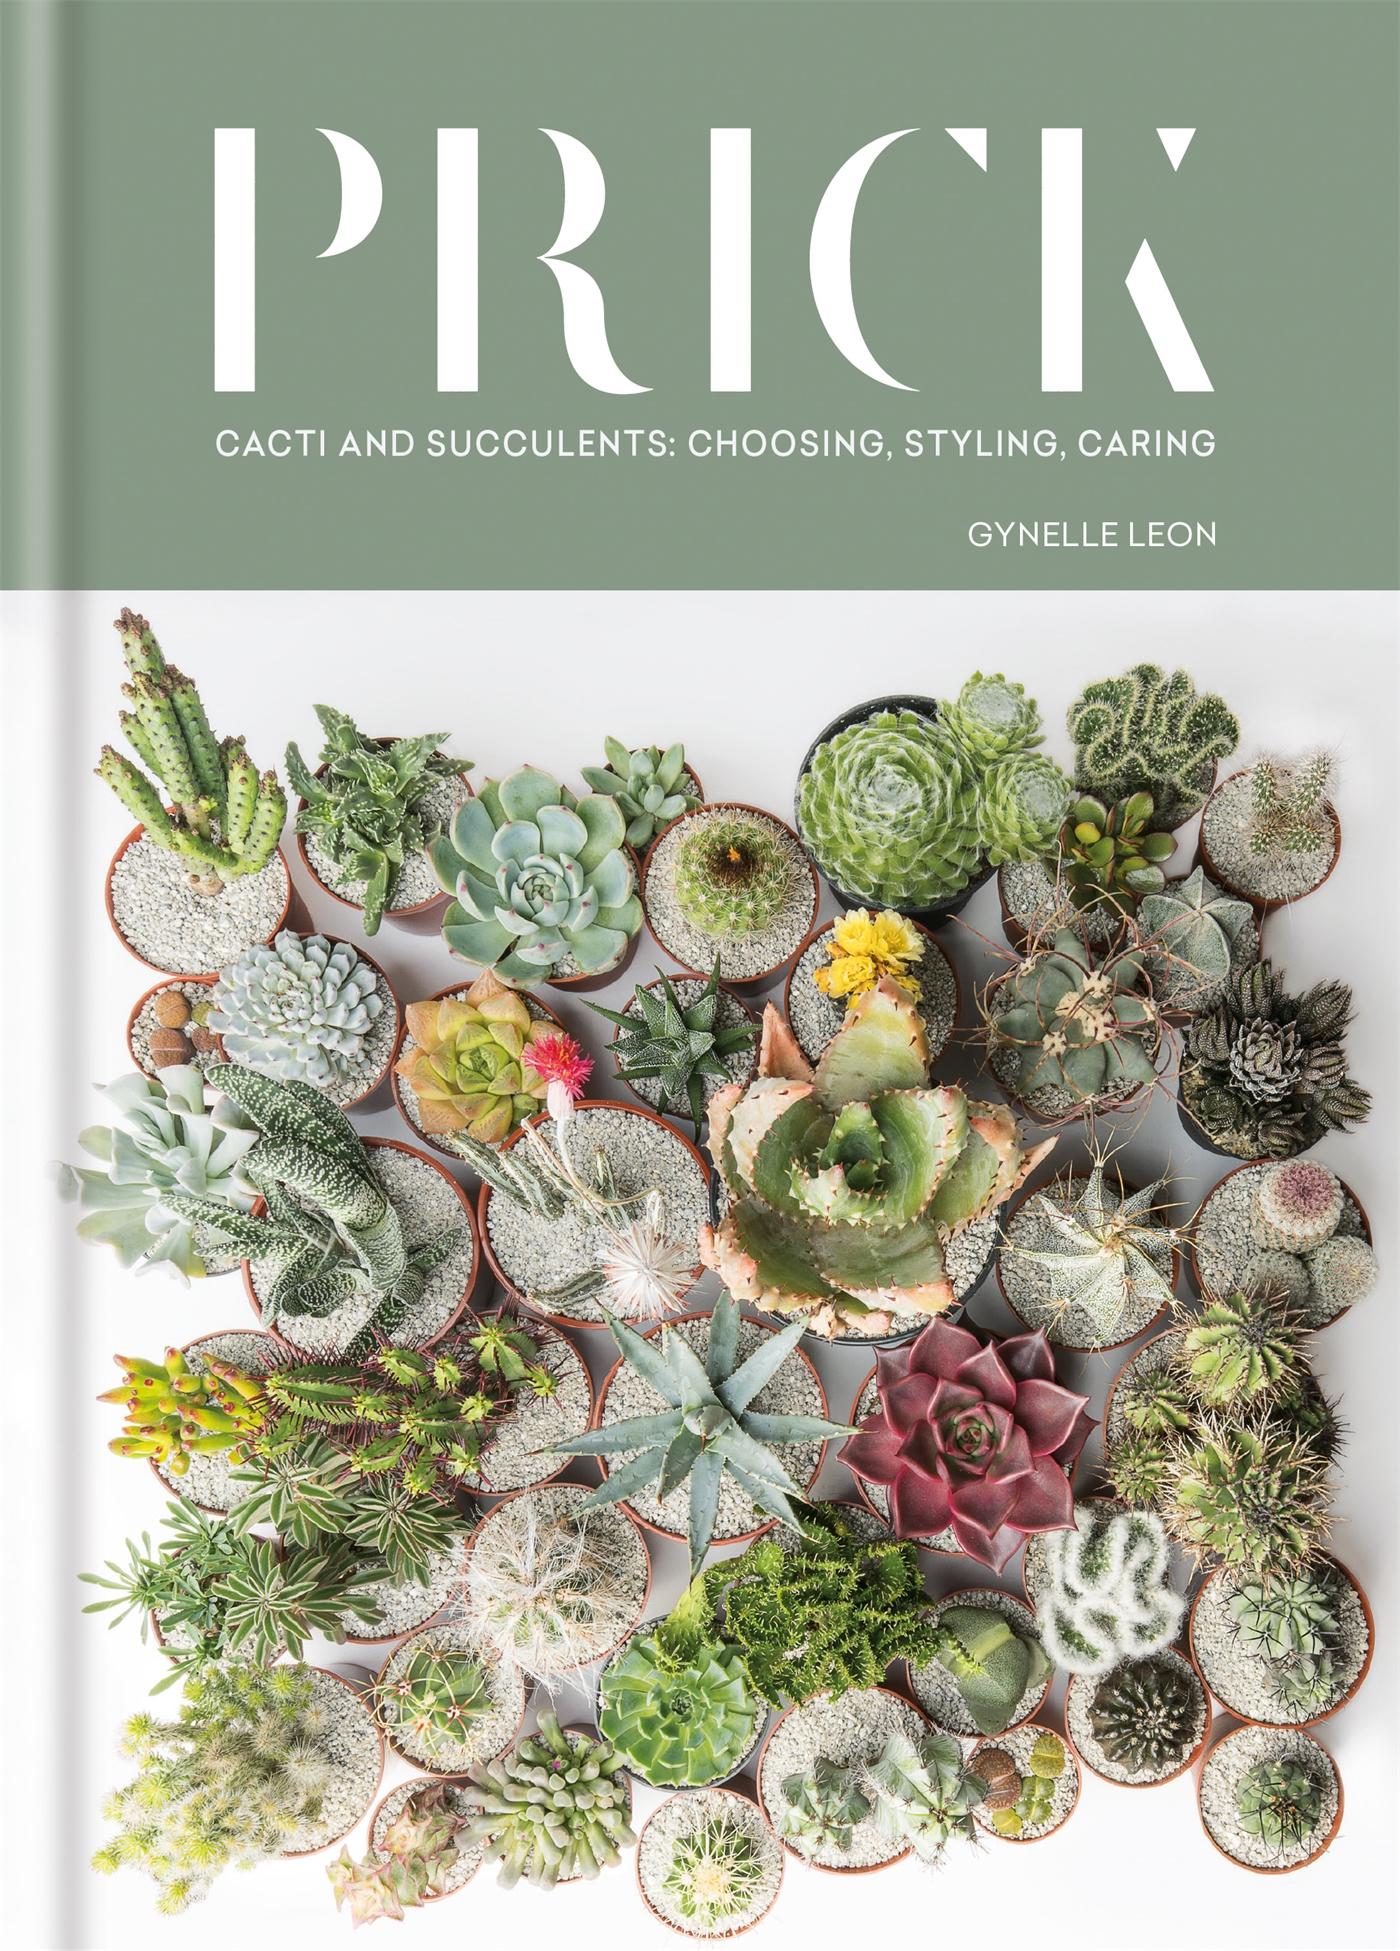 Prick | Cacti and Succulents: Choosing, Styling, Caring | Gynelle Leon | Buch | Englisch | 2017 | Octopus Publishing Group | EAN 9781784723675 - Leon, Gynelle